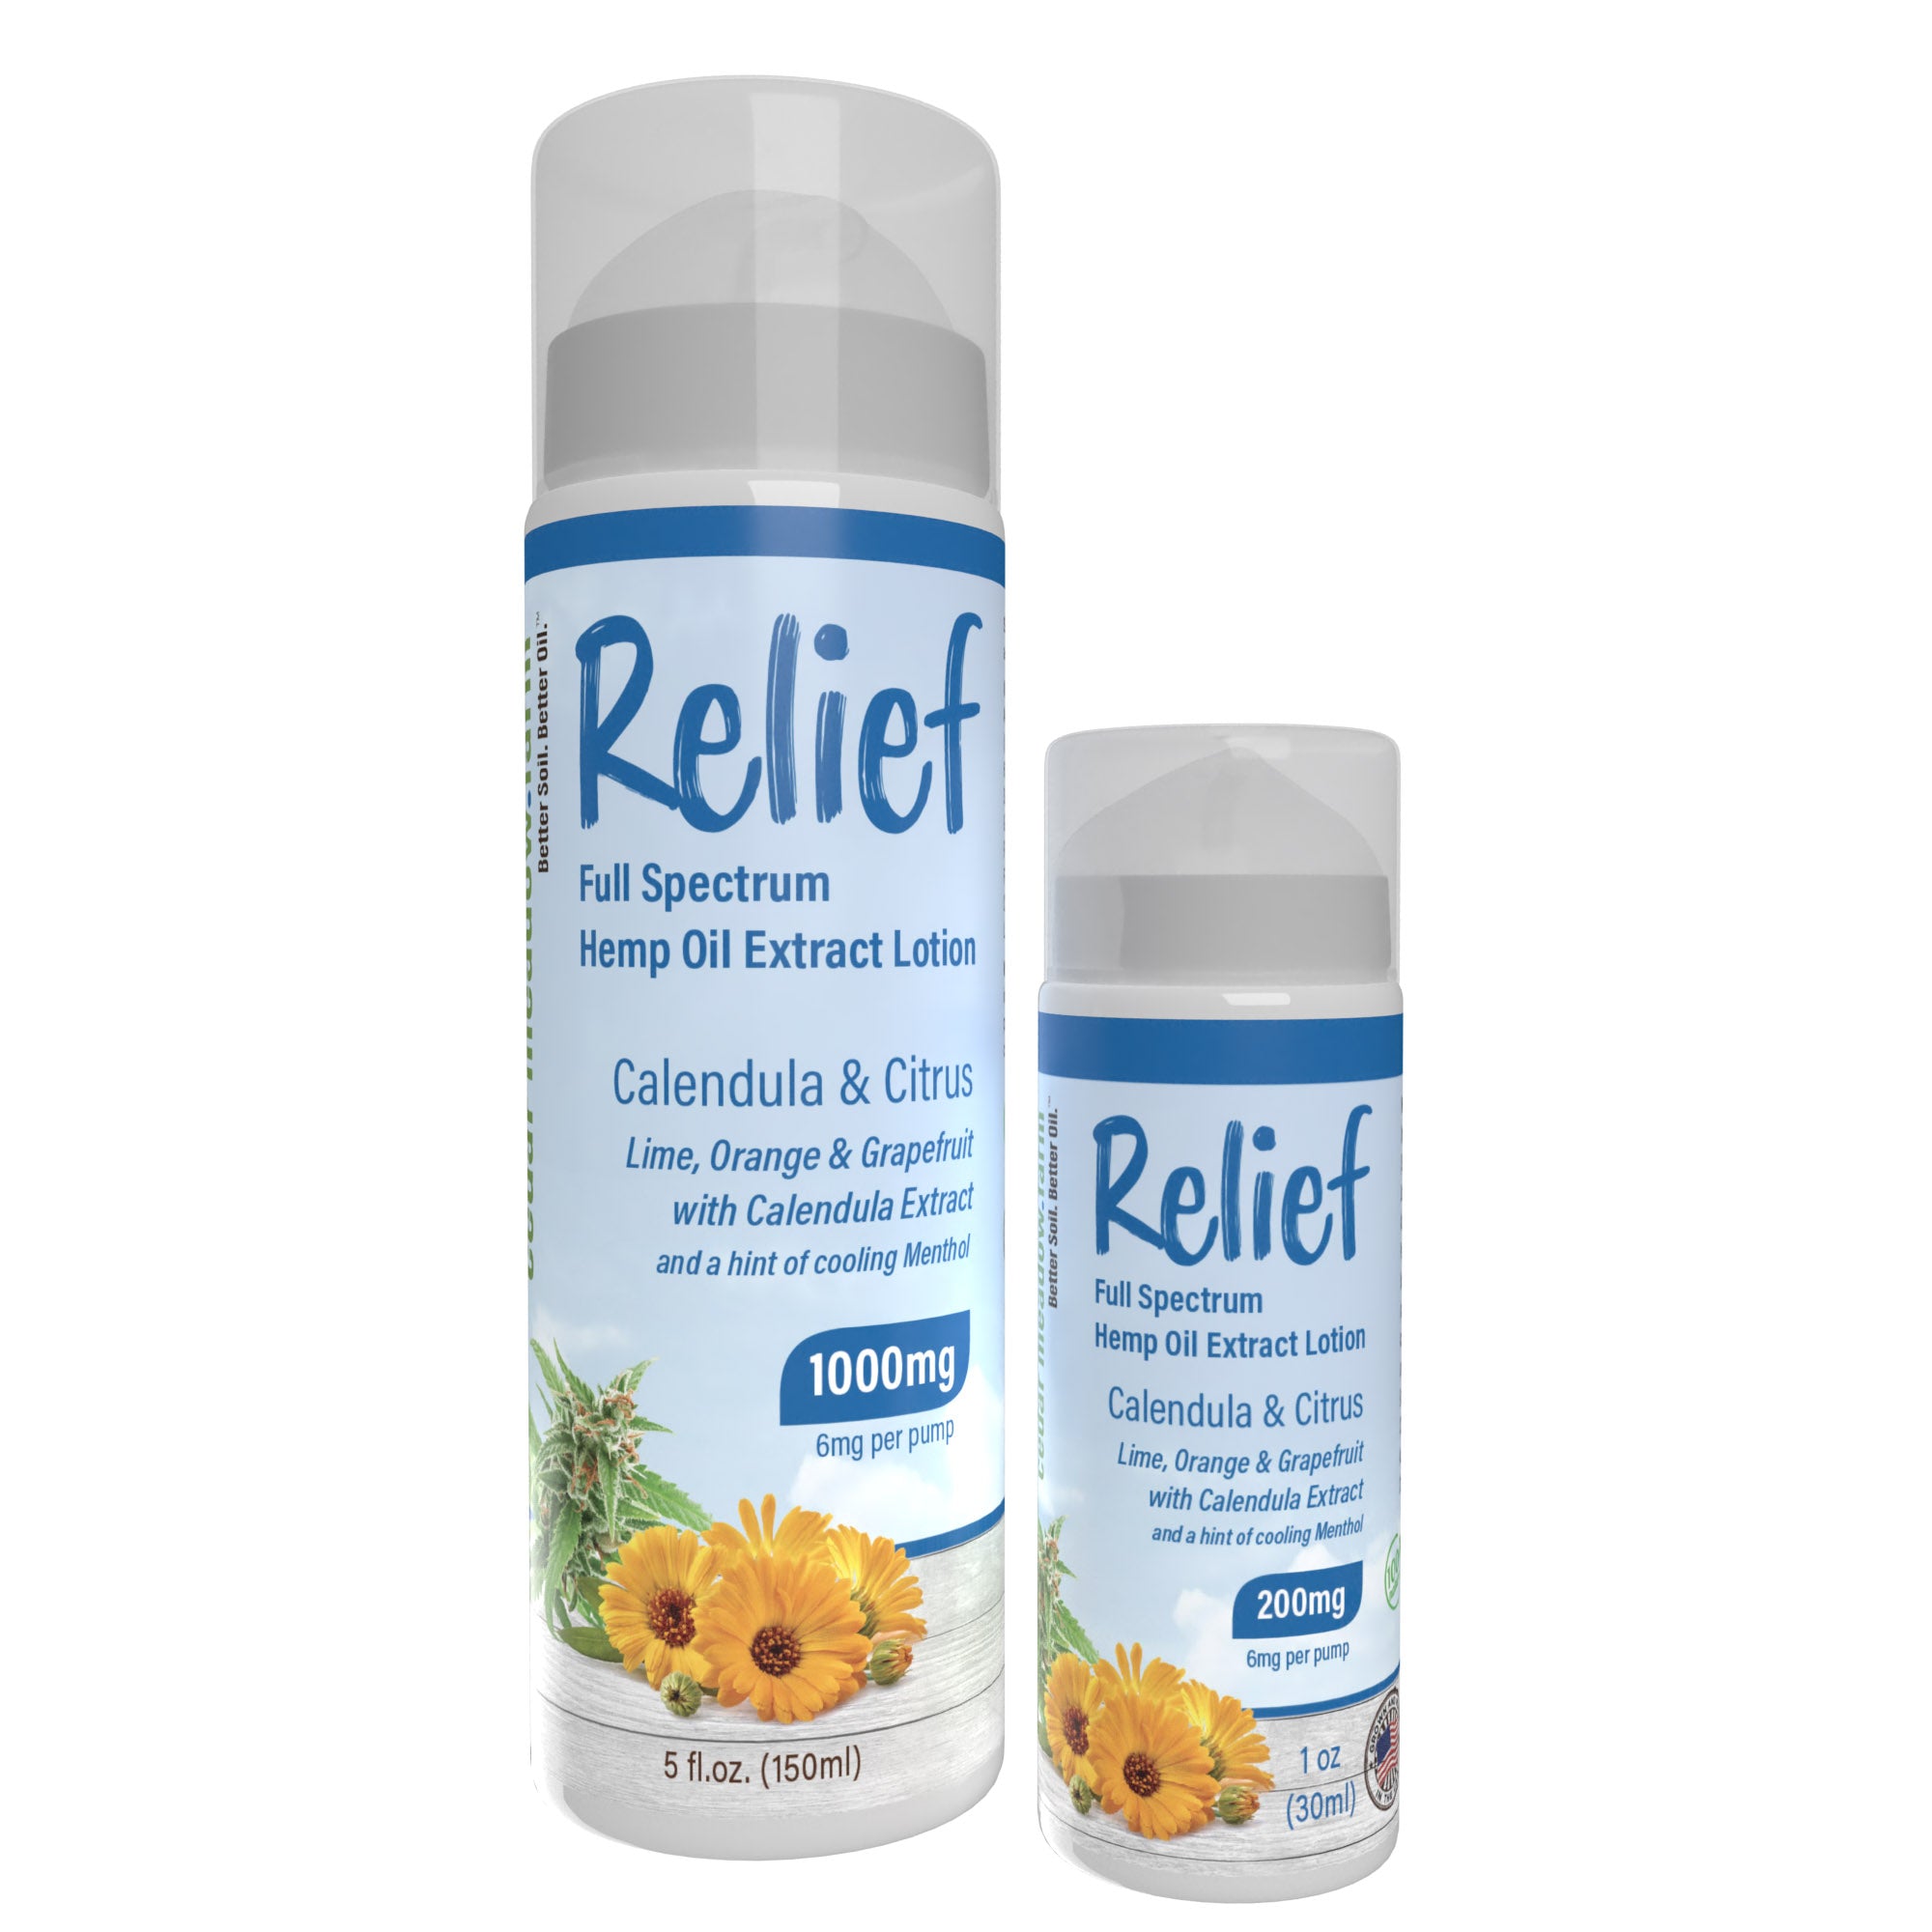 RELIEF CBD Lotion-
RELIEF for daily aches &amp; pains is here!You'll love this fan-favorite topical lotion. 

This large 1000mg bottle will provide long-lasting relief! Keep a bottle -Cedar Meadow Farm